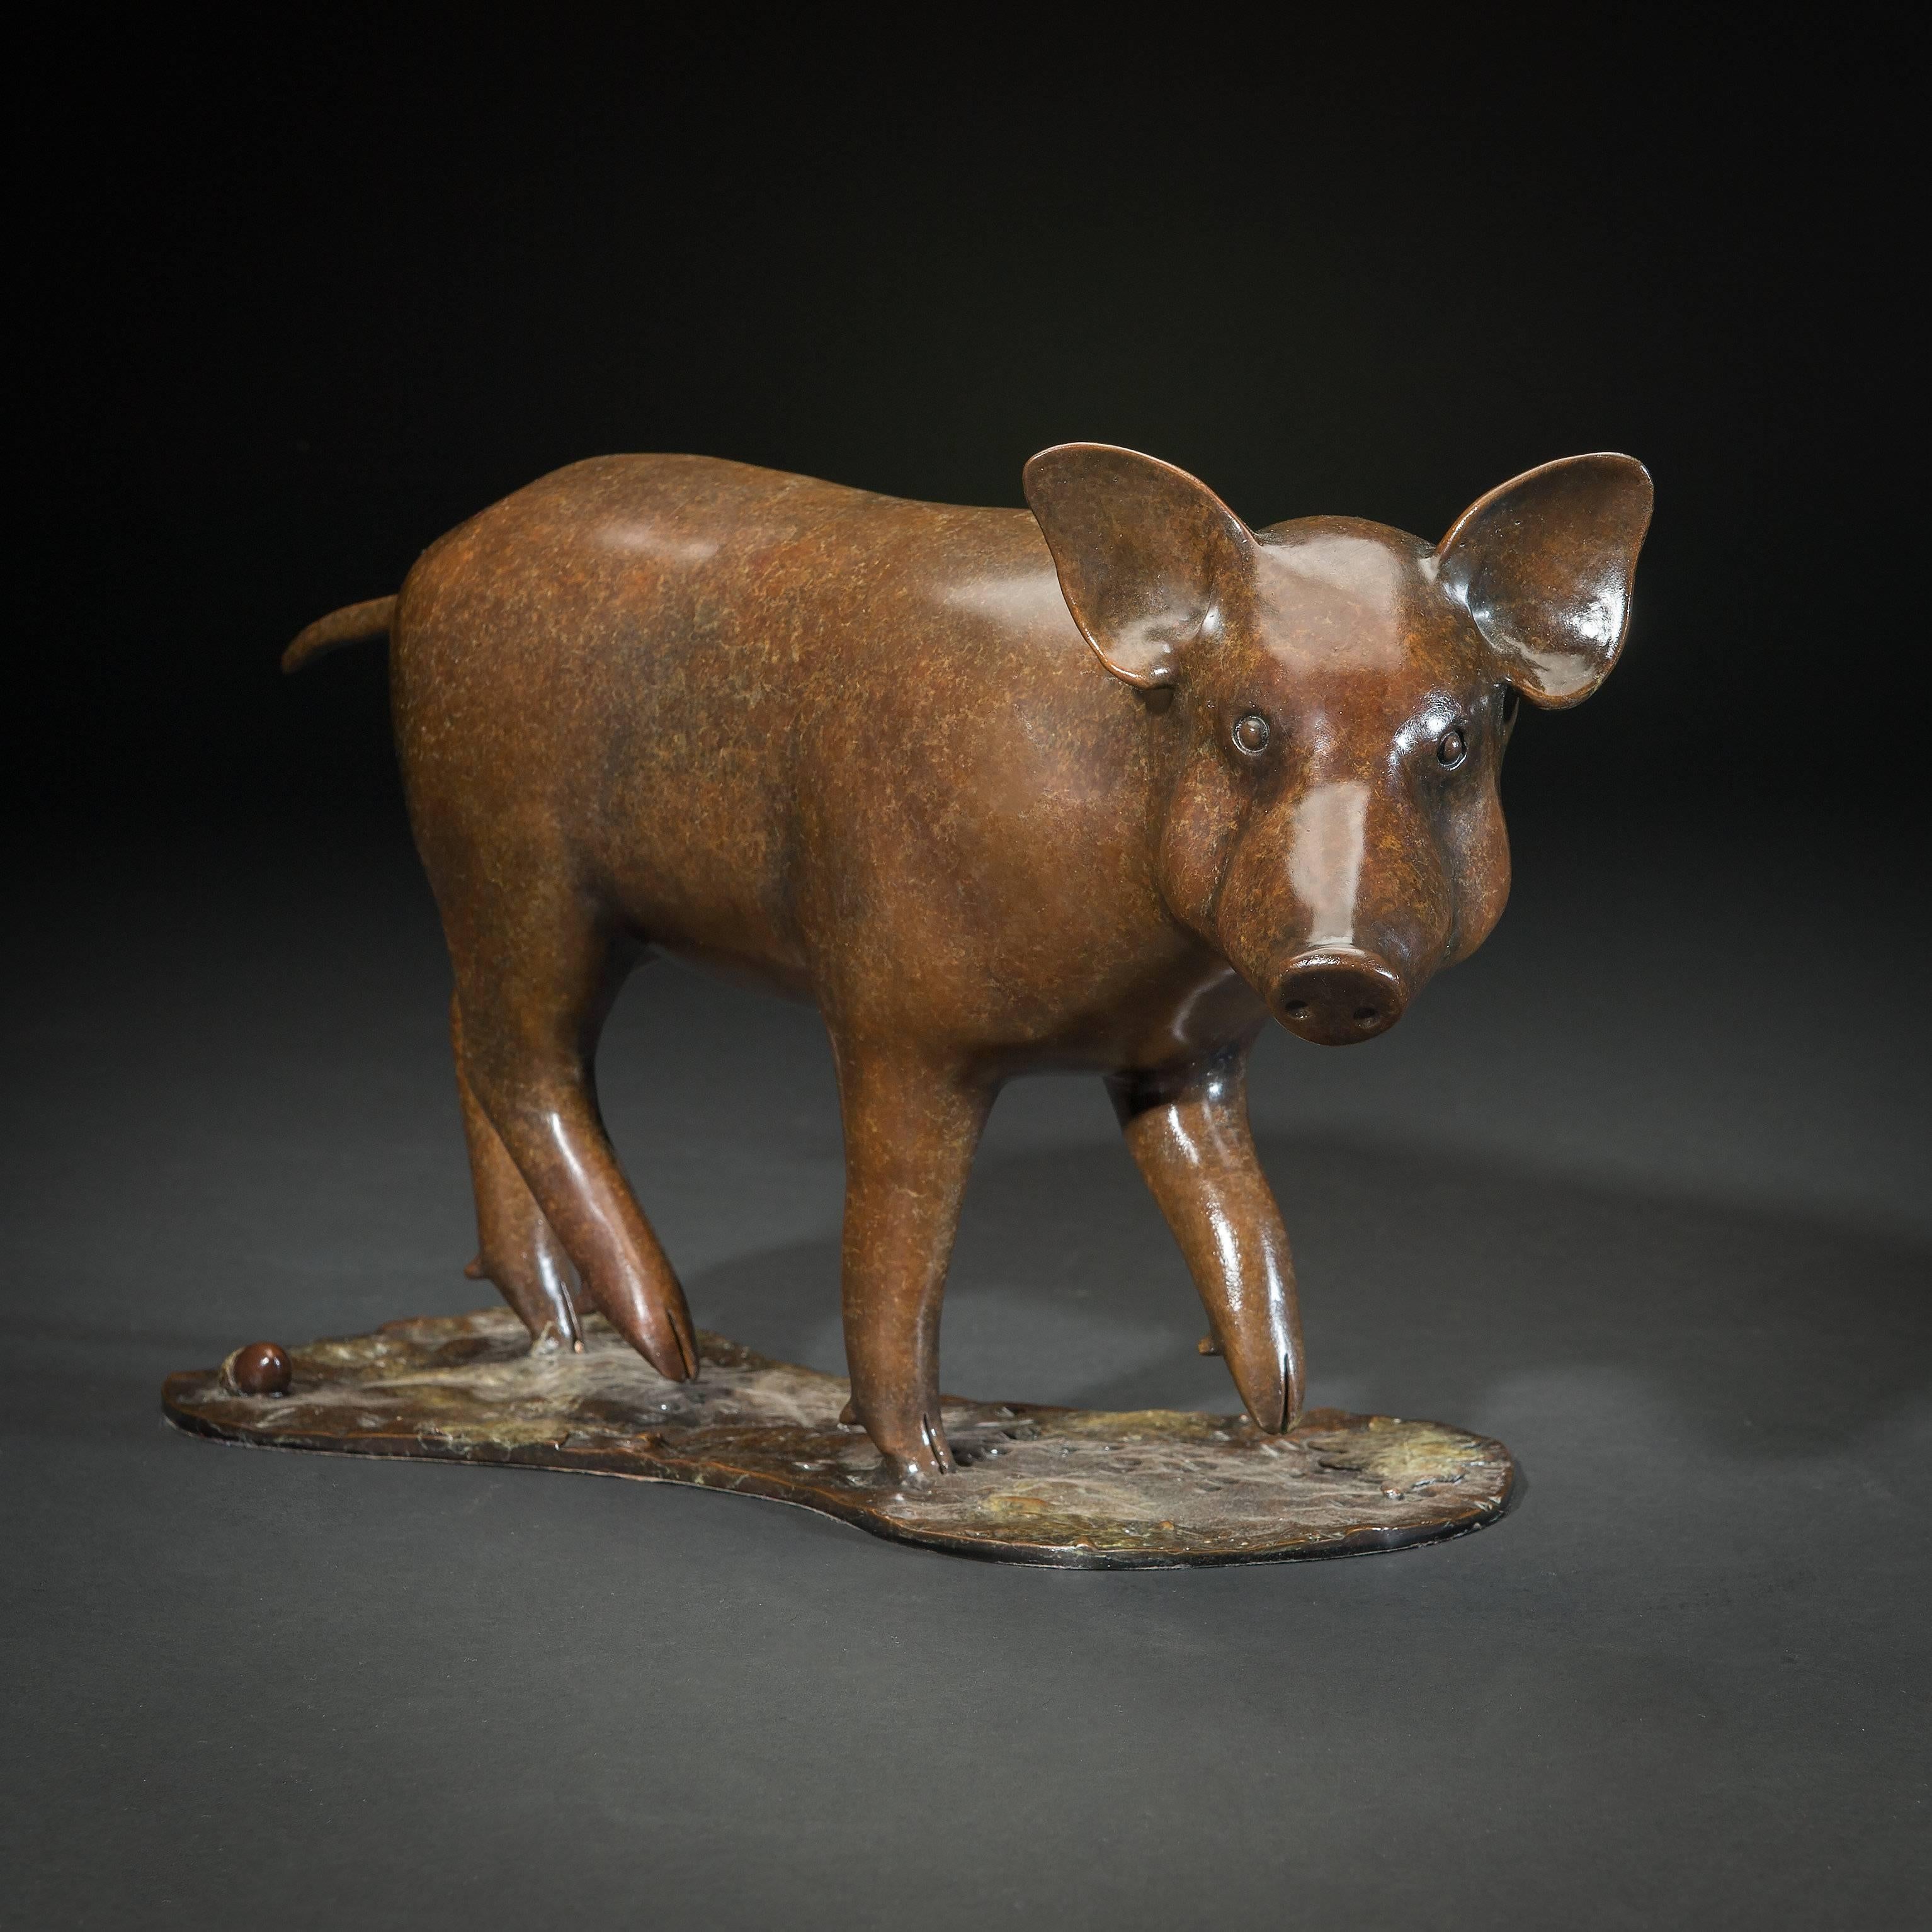 Richard Smith b.1955 Figurative Sculpture - 'Wild Boar' Solid Bronze Contemporary Wildlife sculpture of a pig in the forest